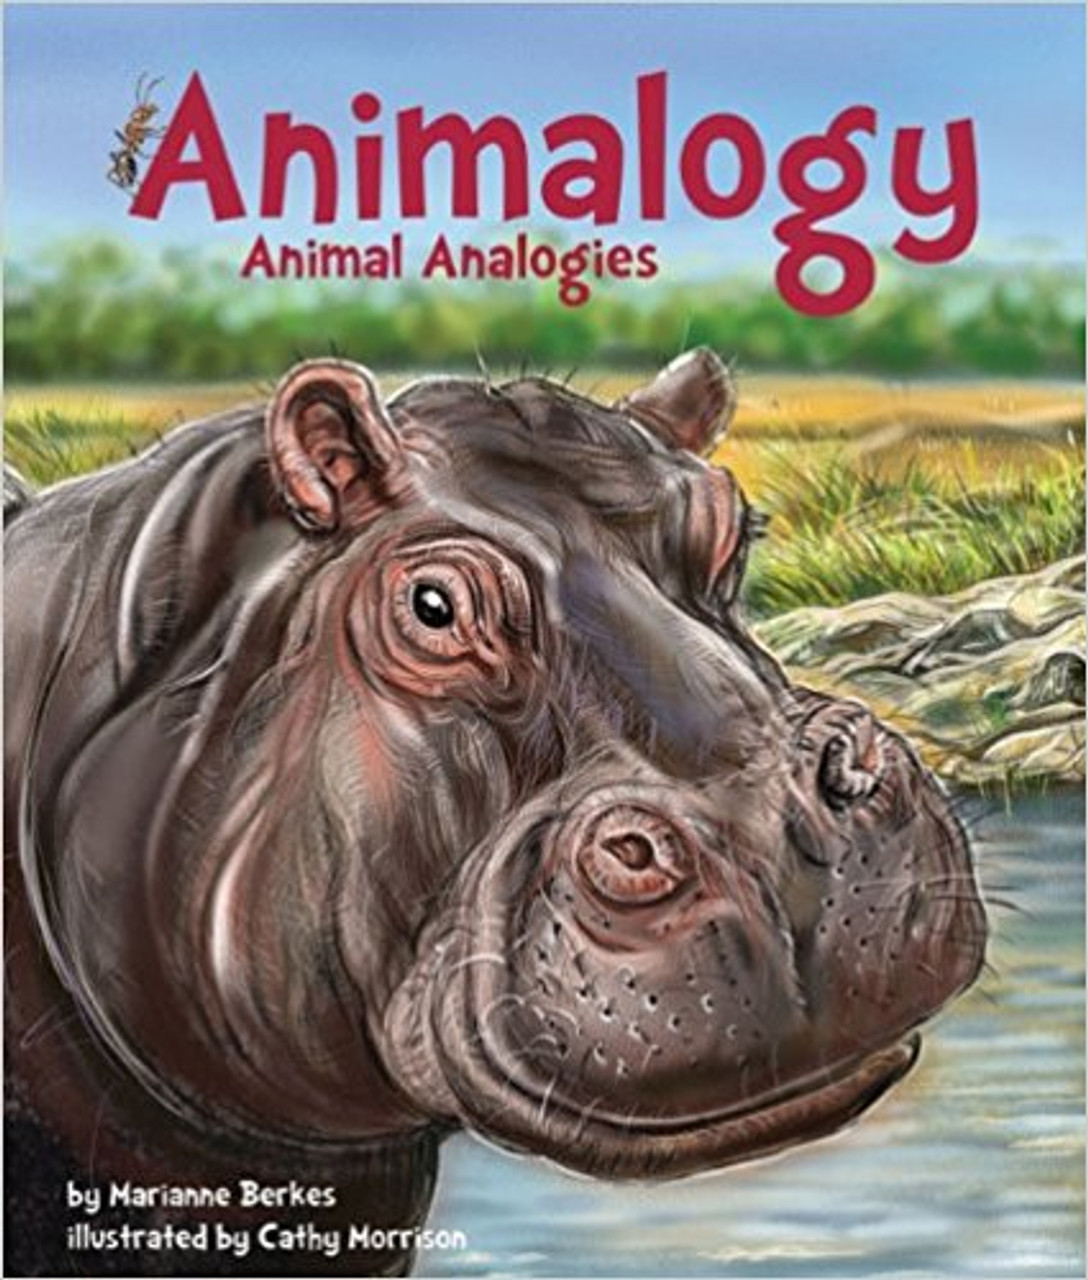 Compares and contrasts a variety of animals through rhyming analogies.